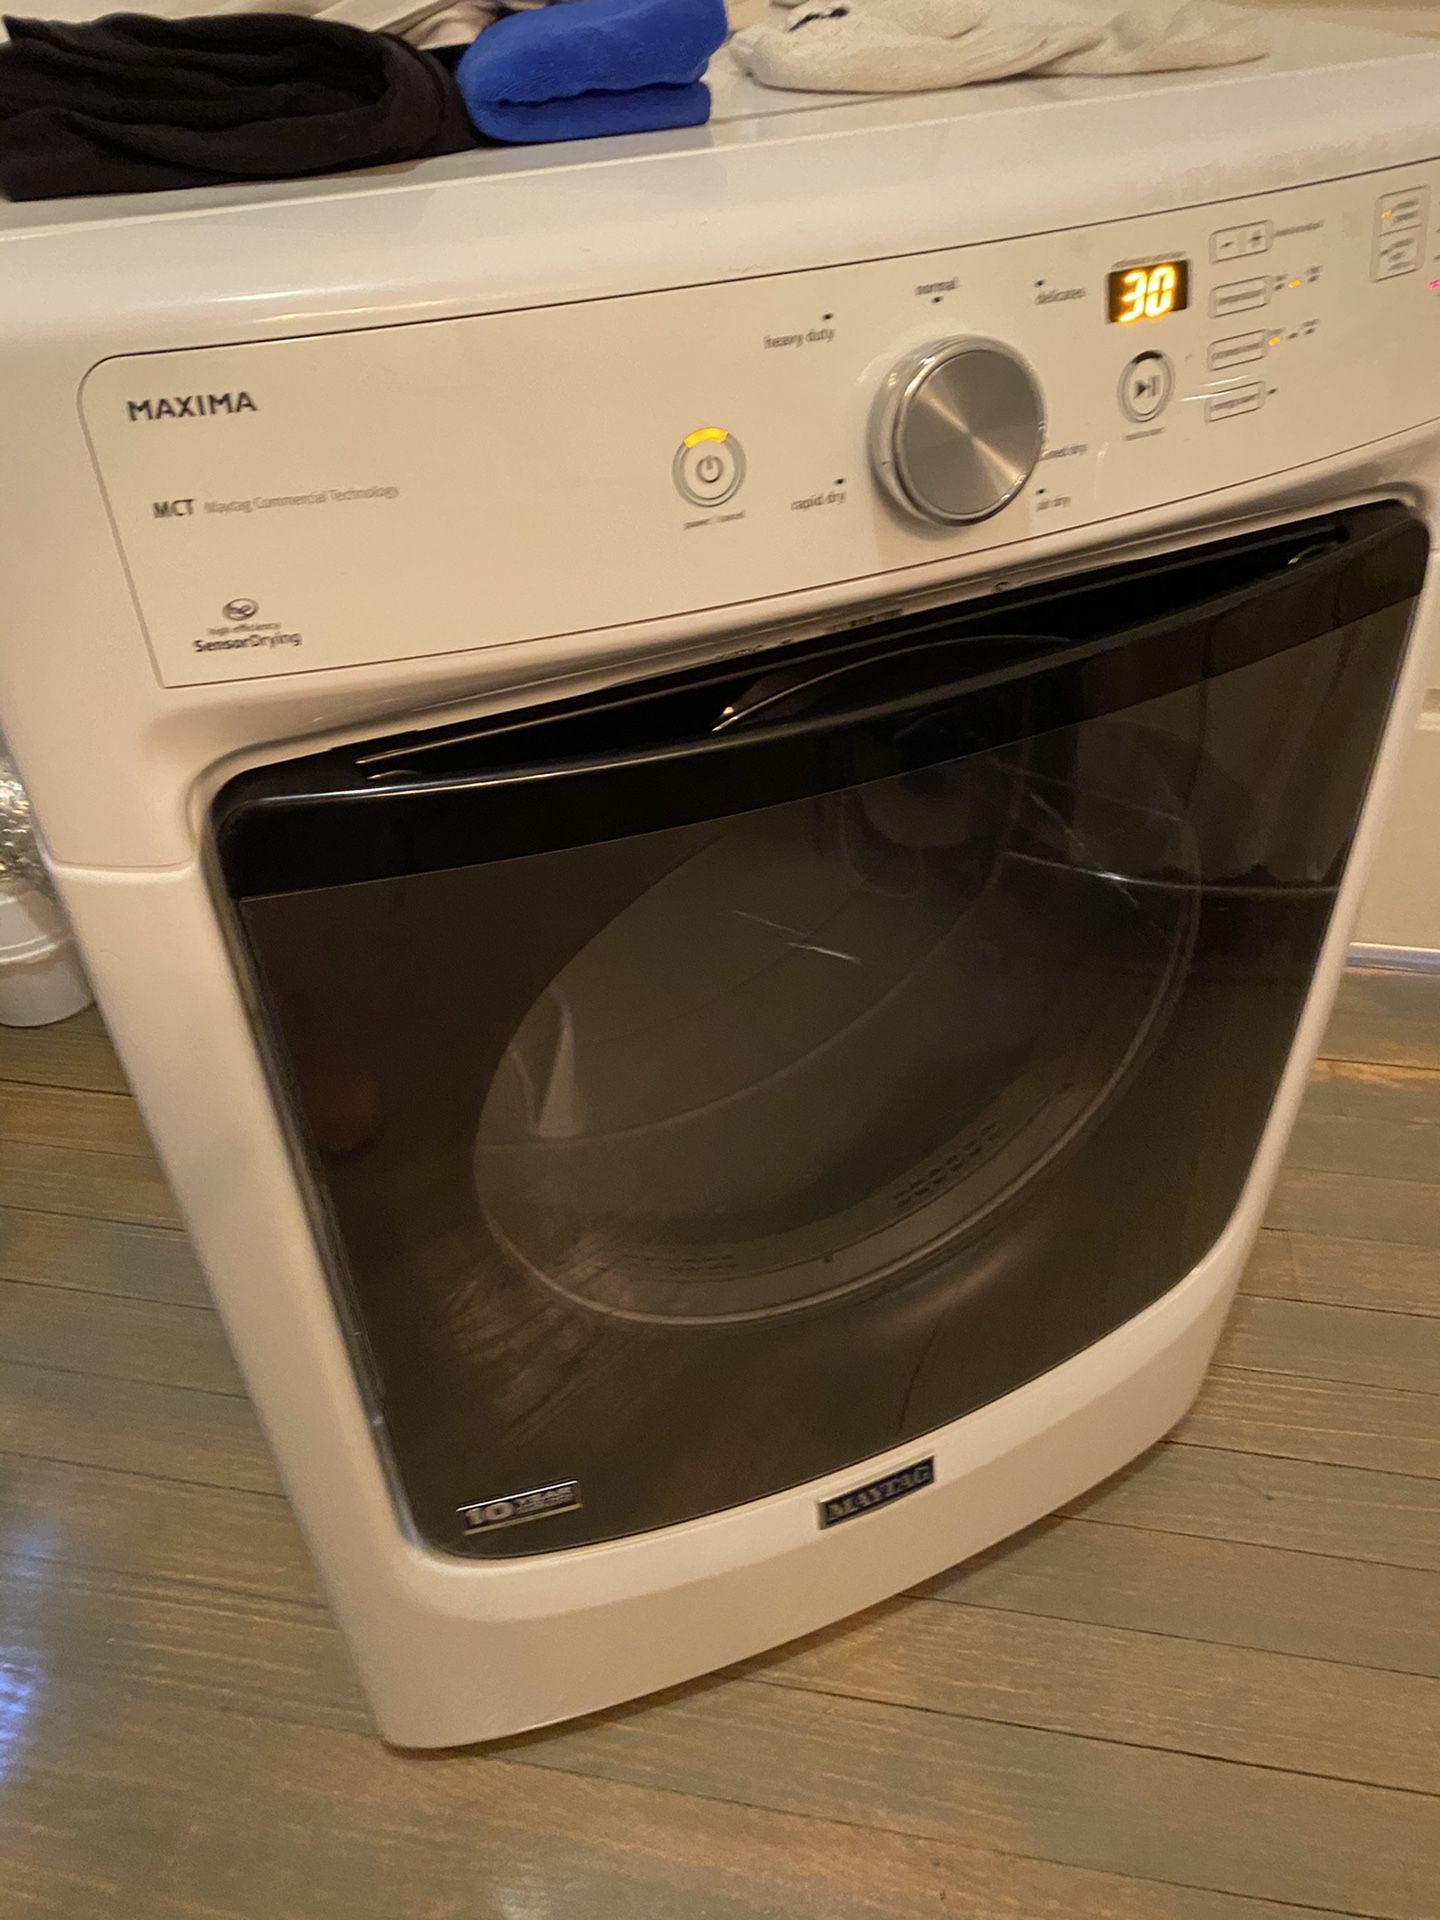 Maytag Maxima Washer and Dryer